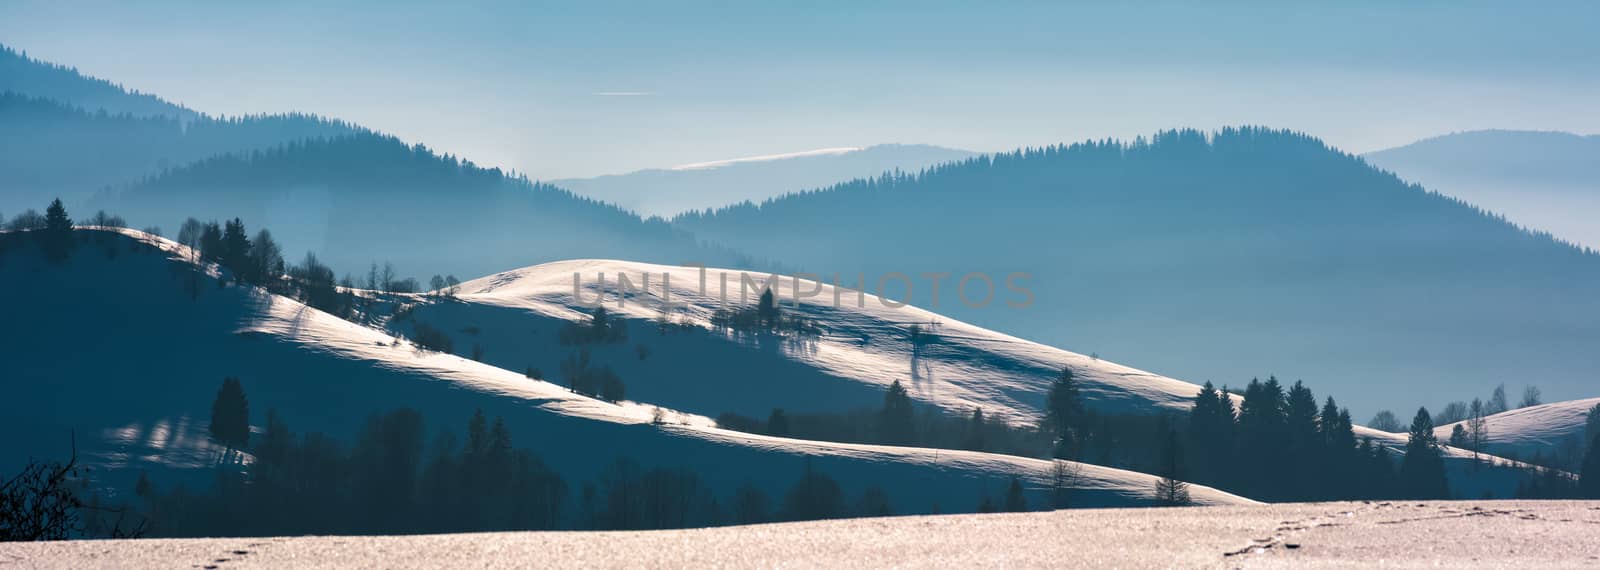 gorgeous winter panorama of rolling hills by Pellinni